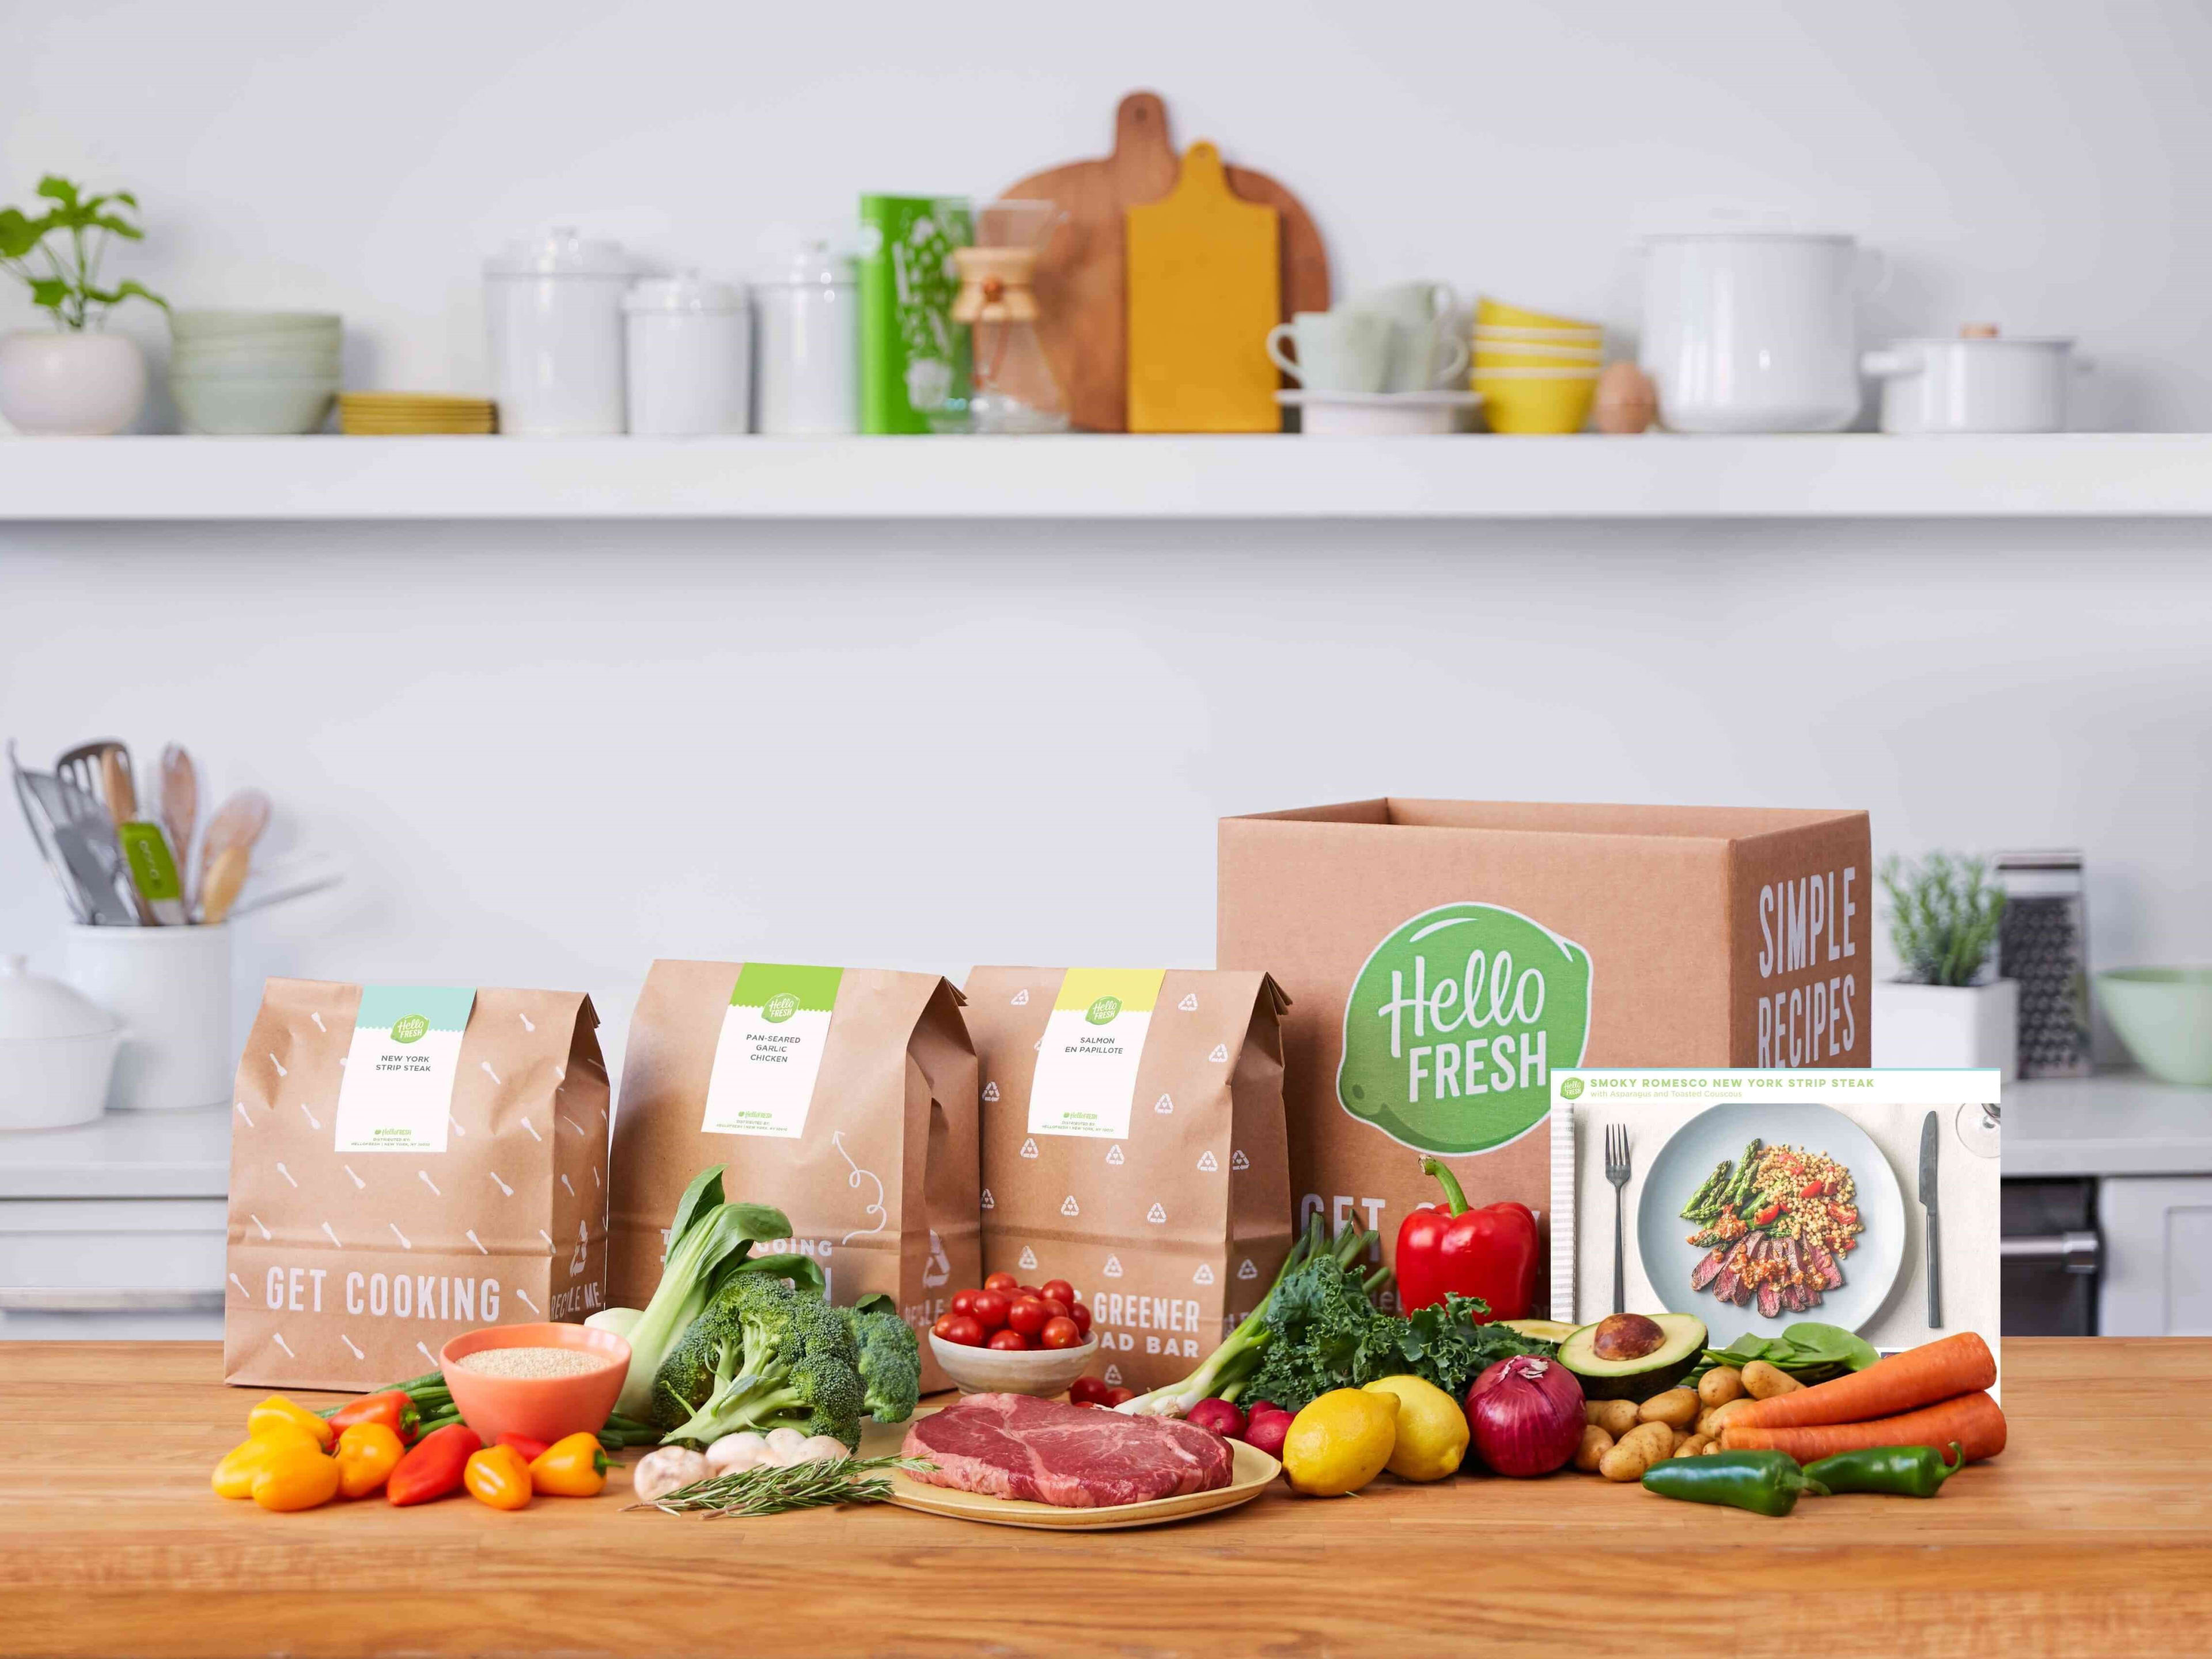 A meal subscription box that works for you